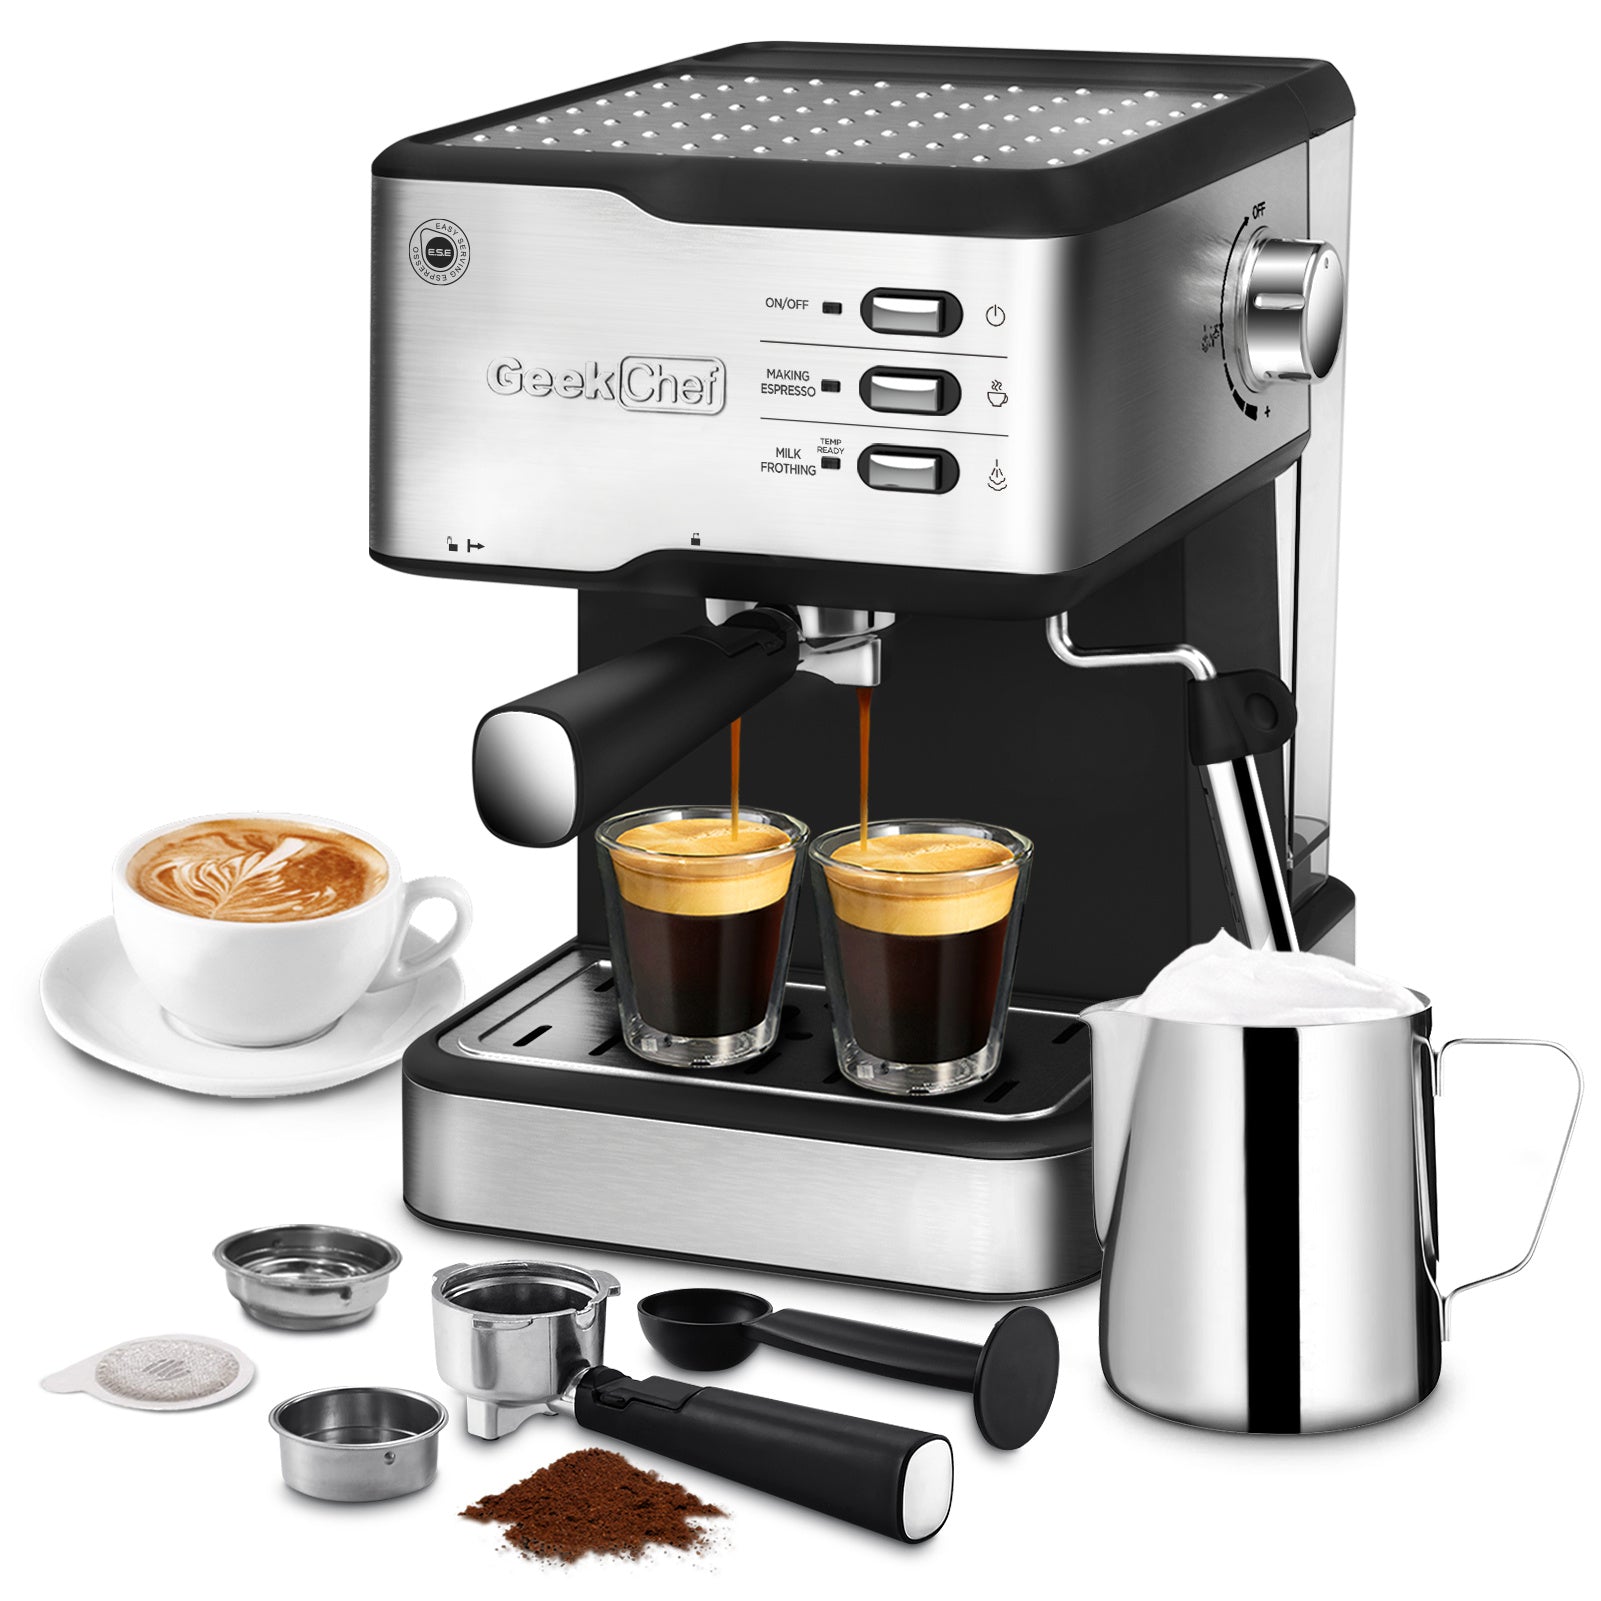 Geek Chef Espresso Machine, Espresso and Cappuccino latte Maker 20 Bar Pump Coffee Machine Compatible with ESE POD capsules filter&Milk Frother Steam Wand,950W,1.5L Water Tank Ban on Amazon